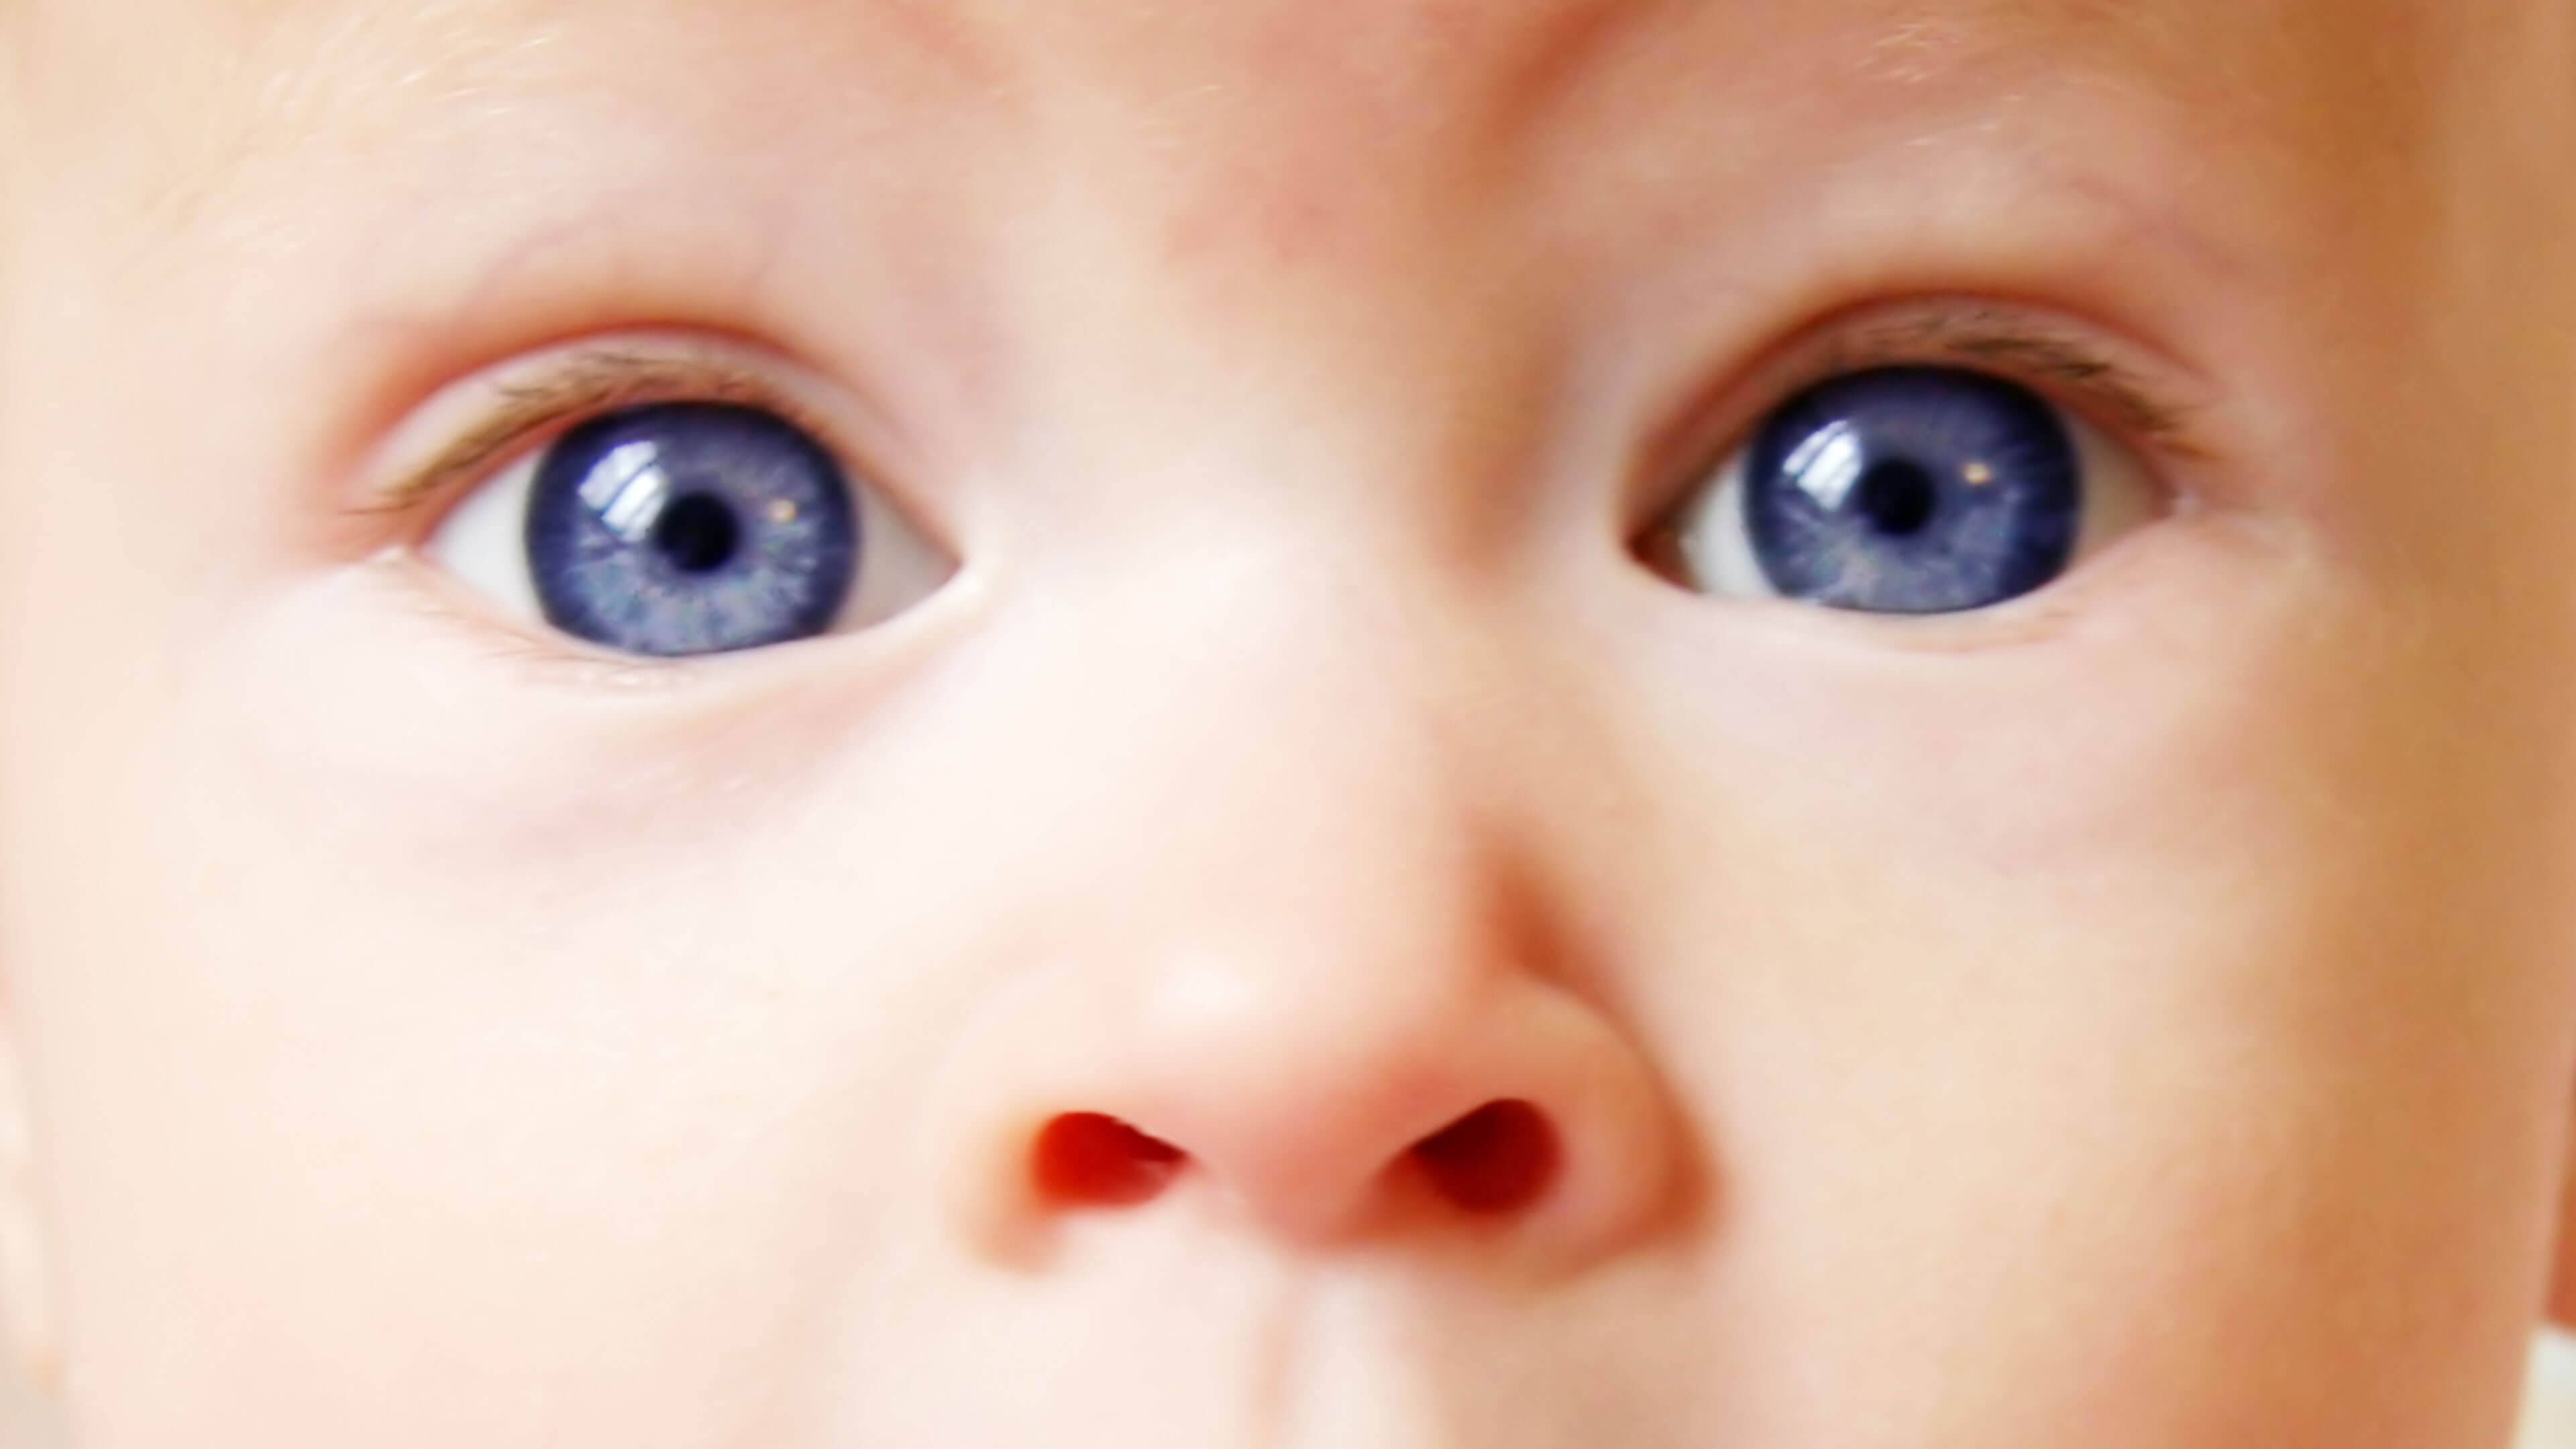 When Do Babies Eyes Change Color? Will 